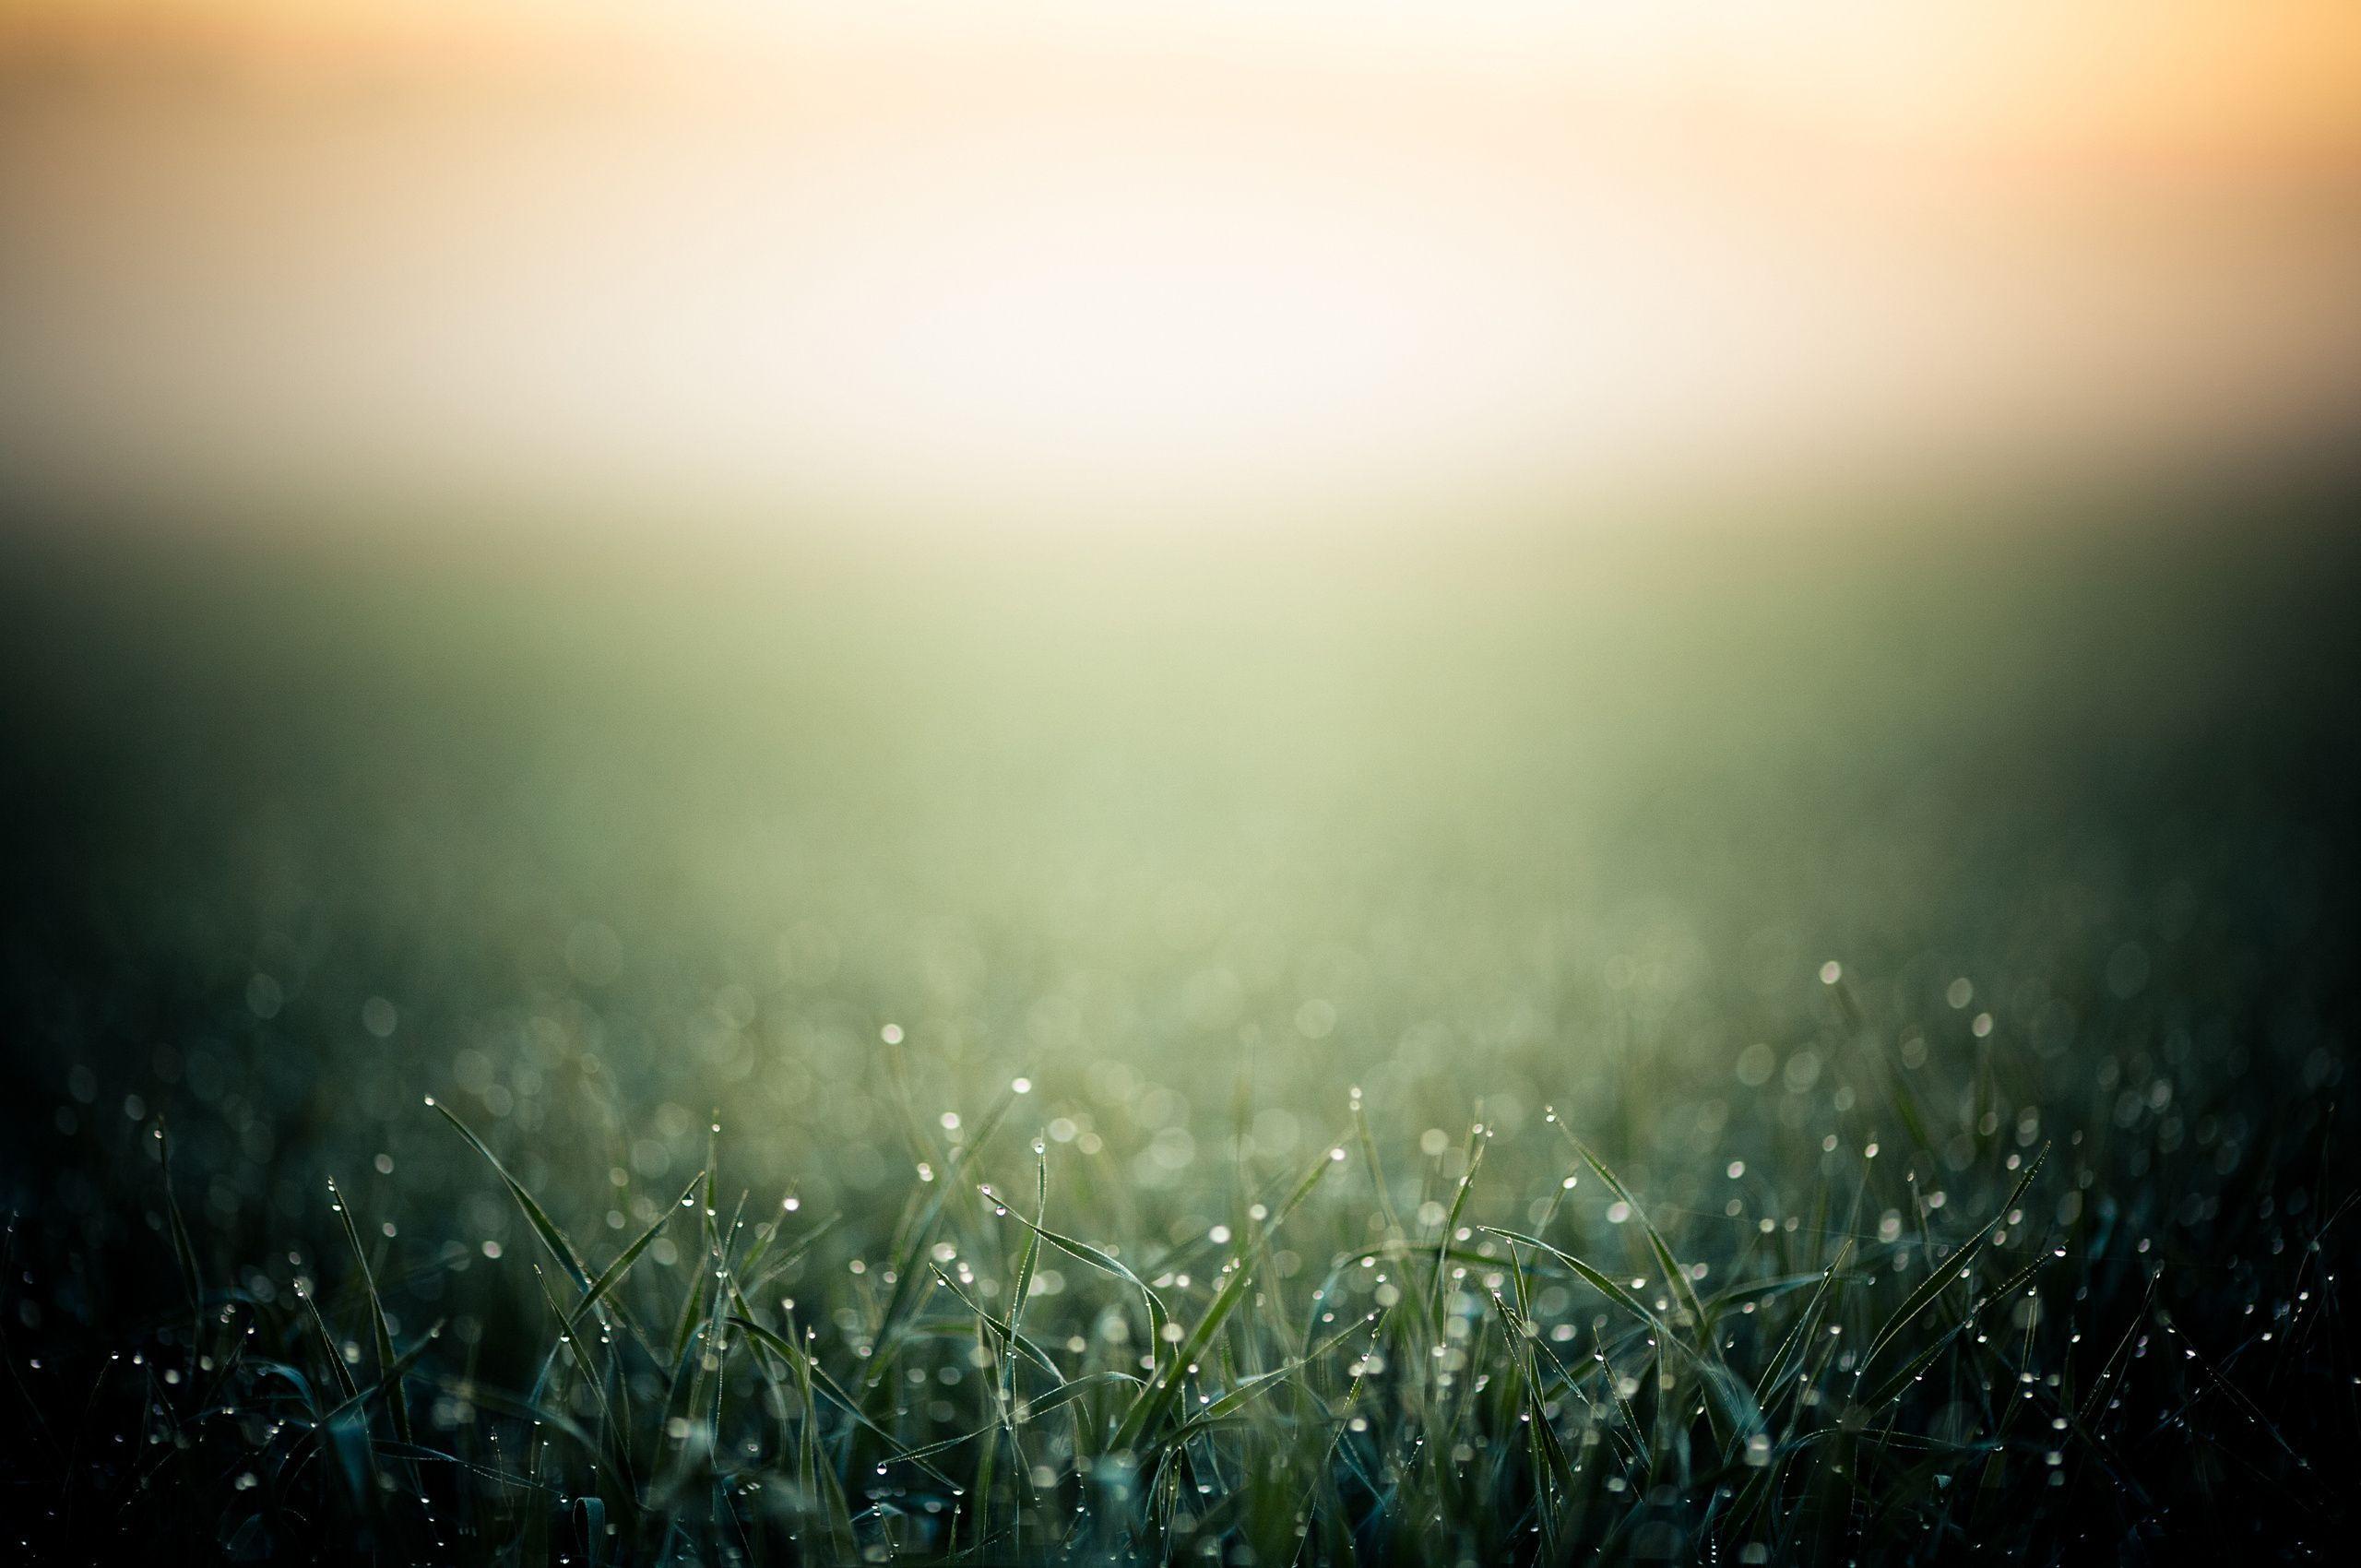 Spring morning with dew wallpaper and image